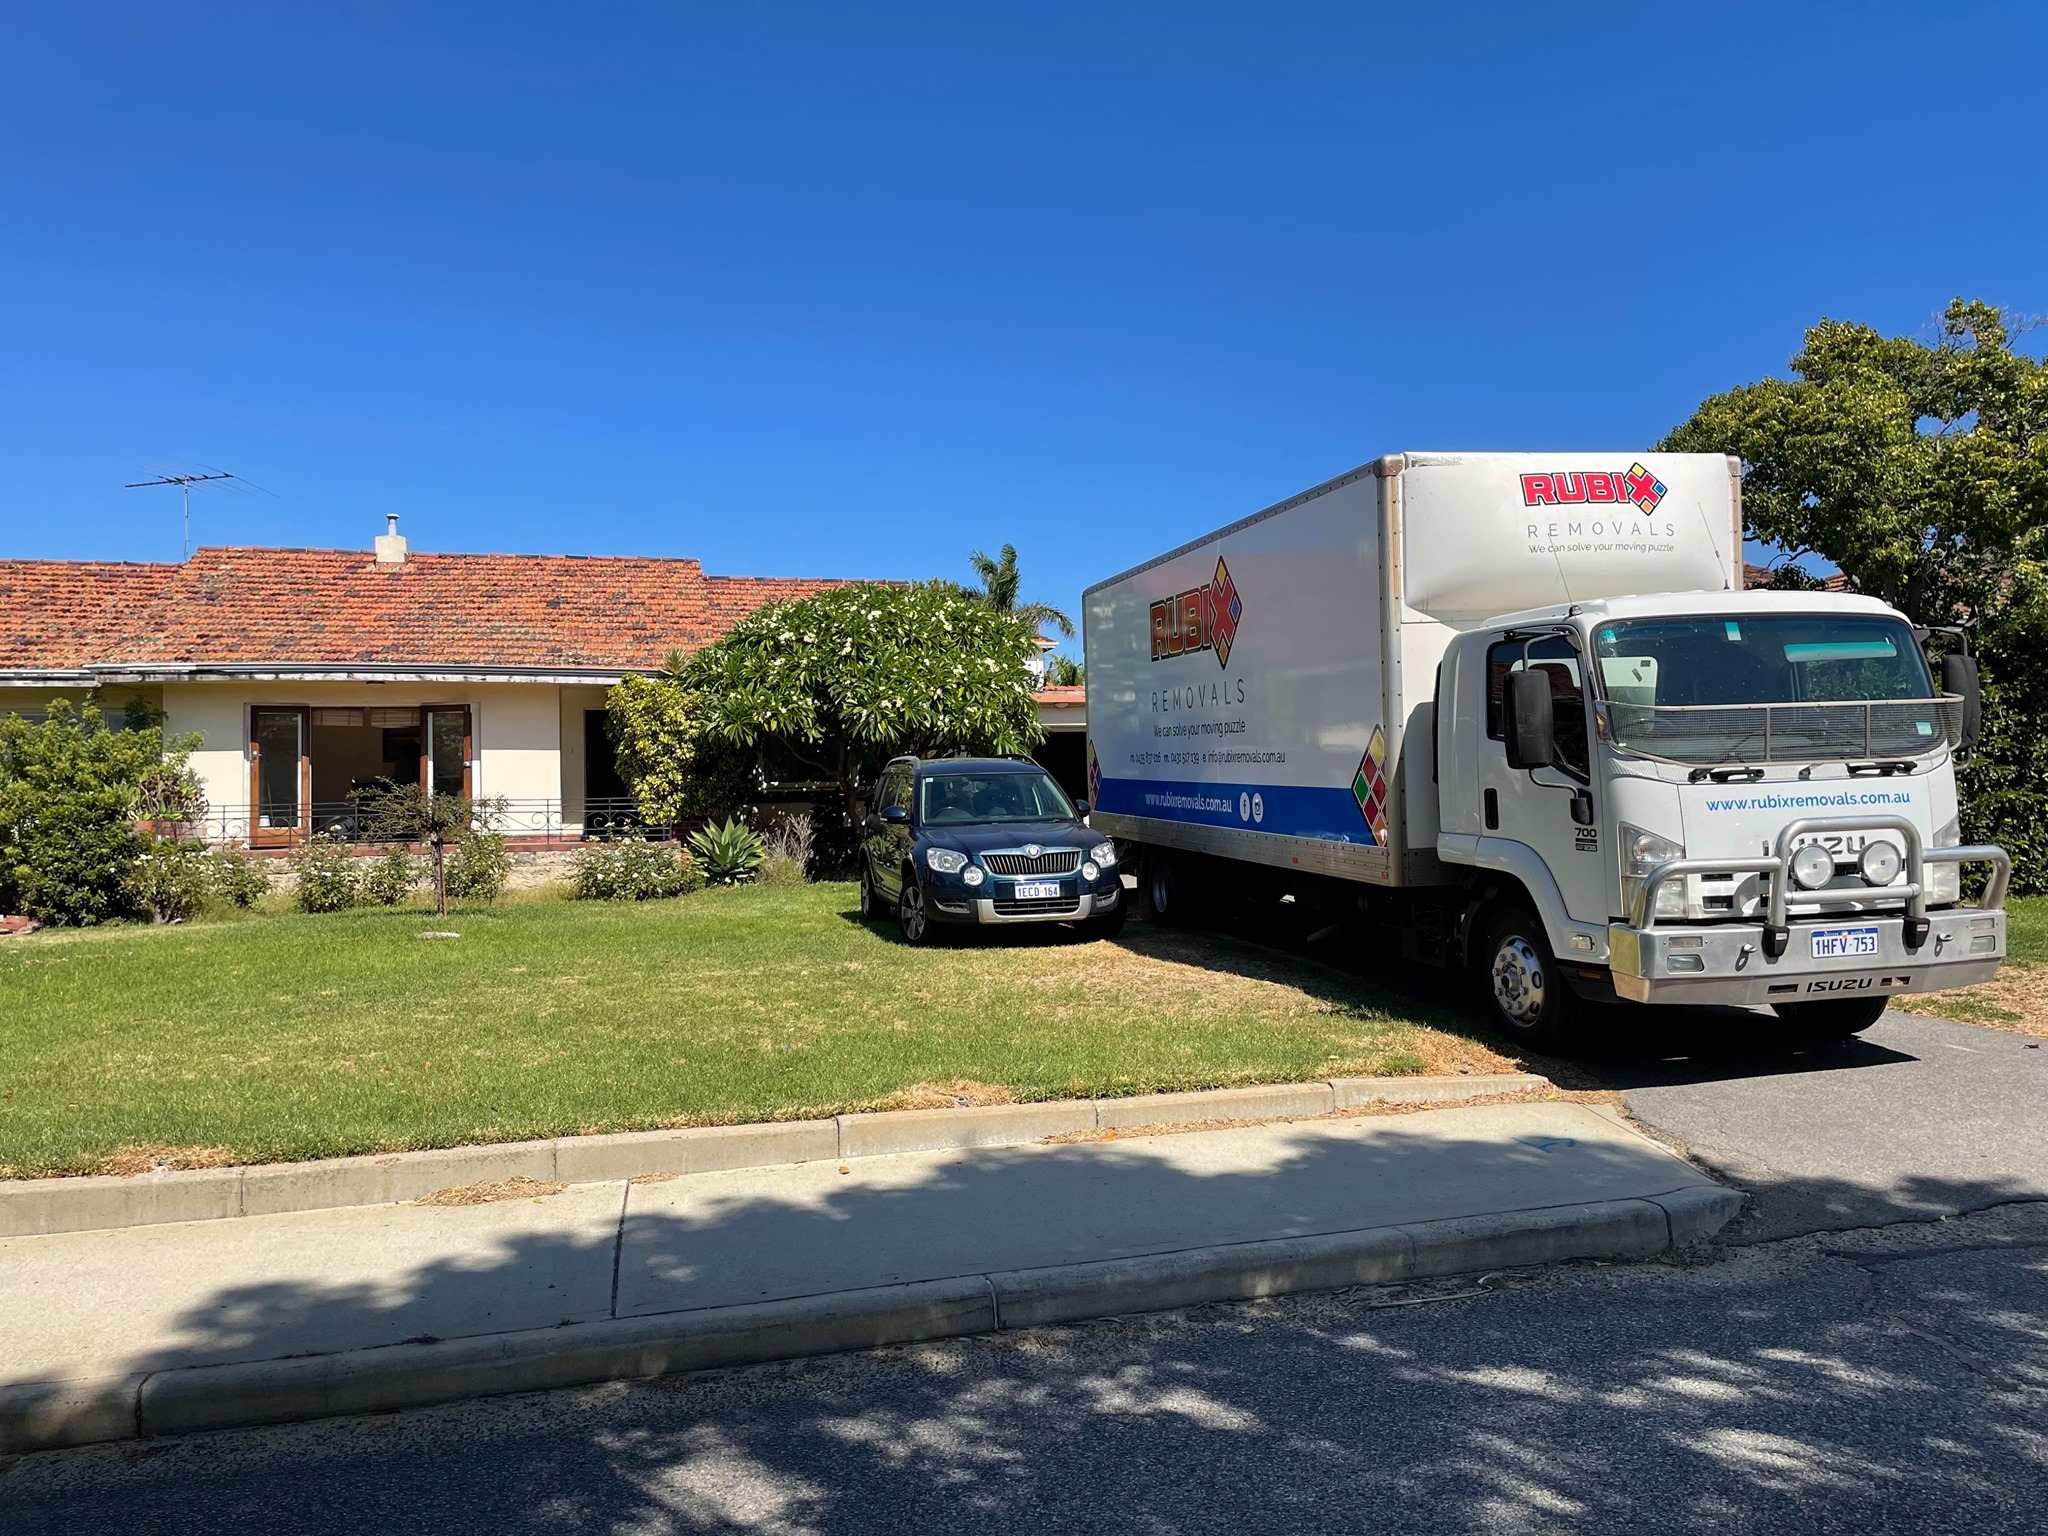 House movers perth